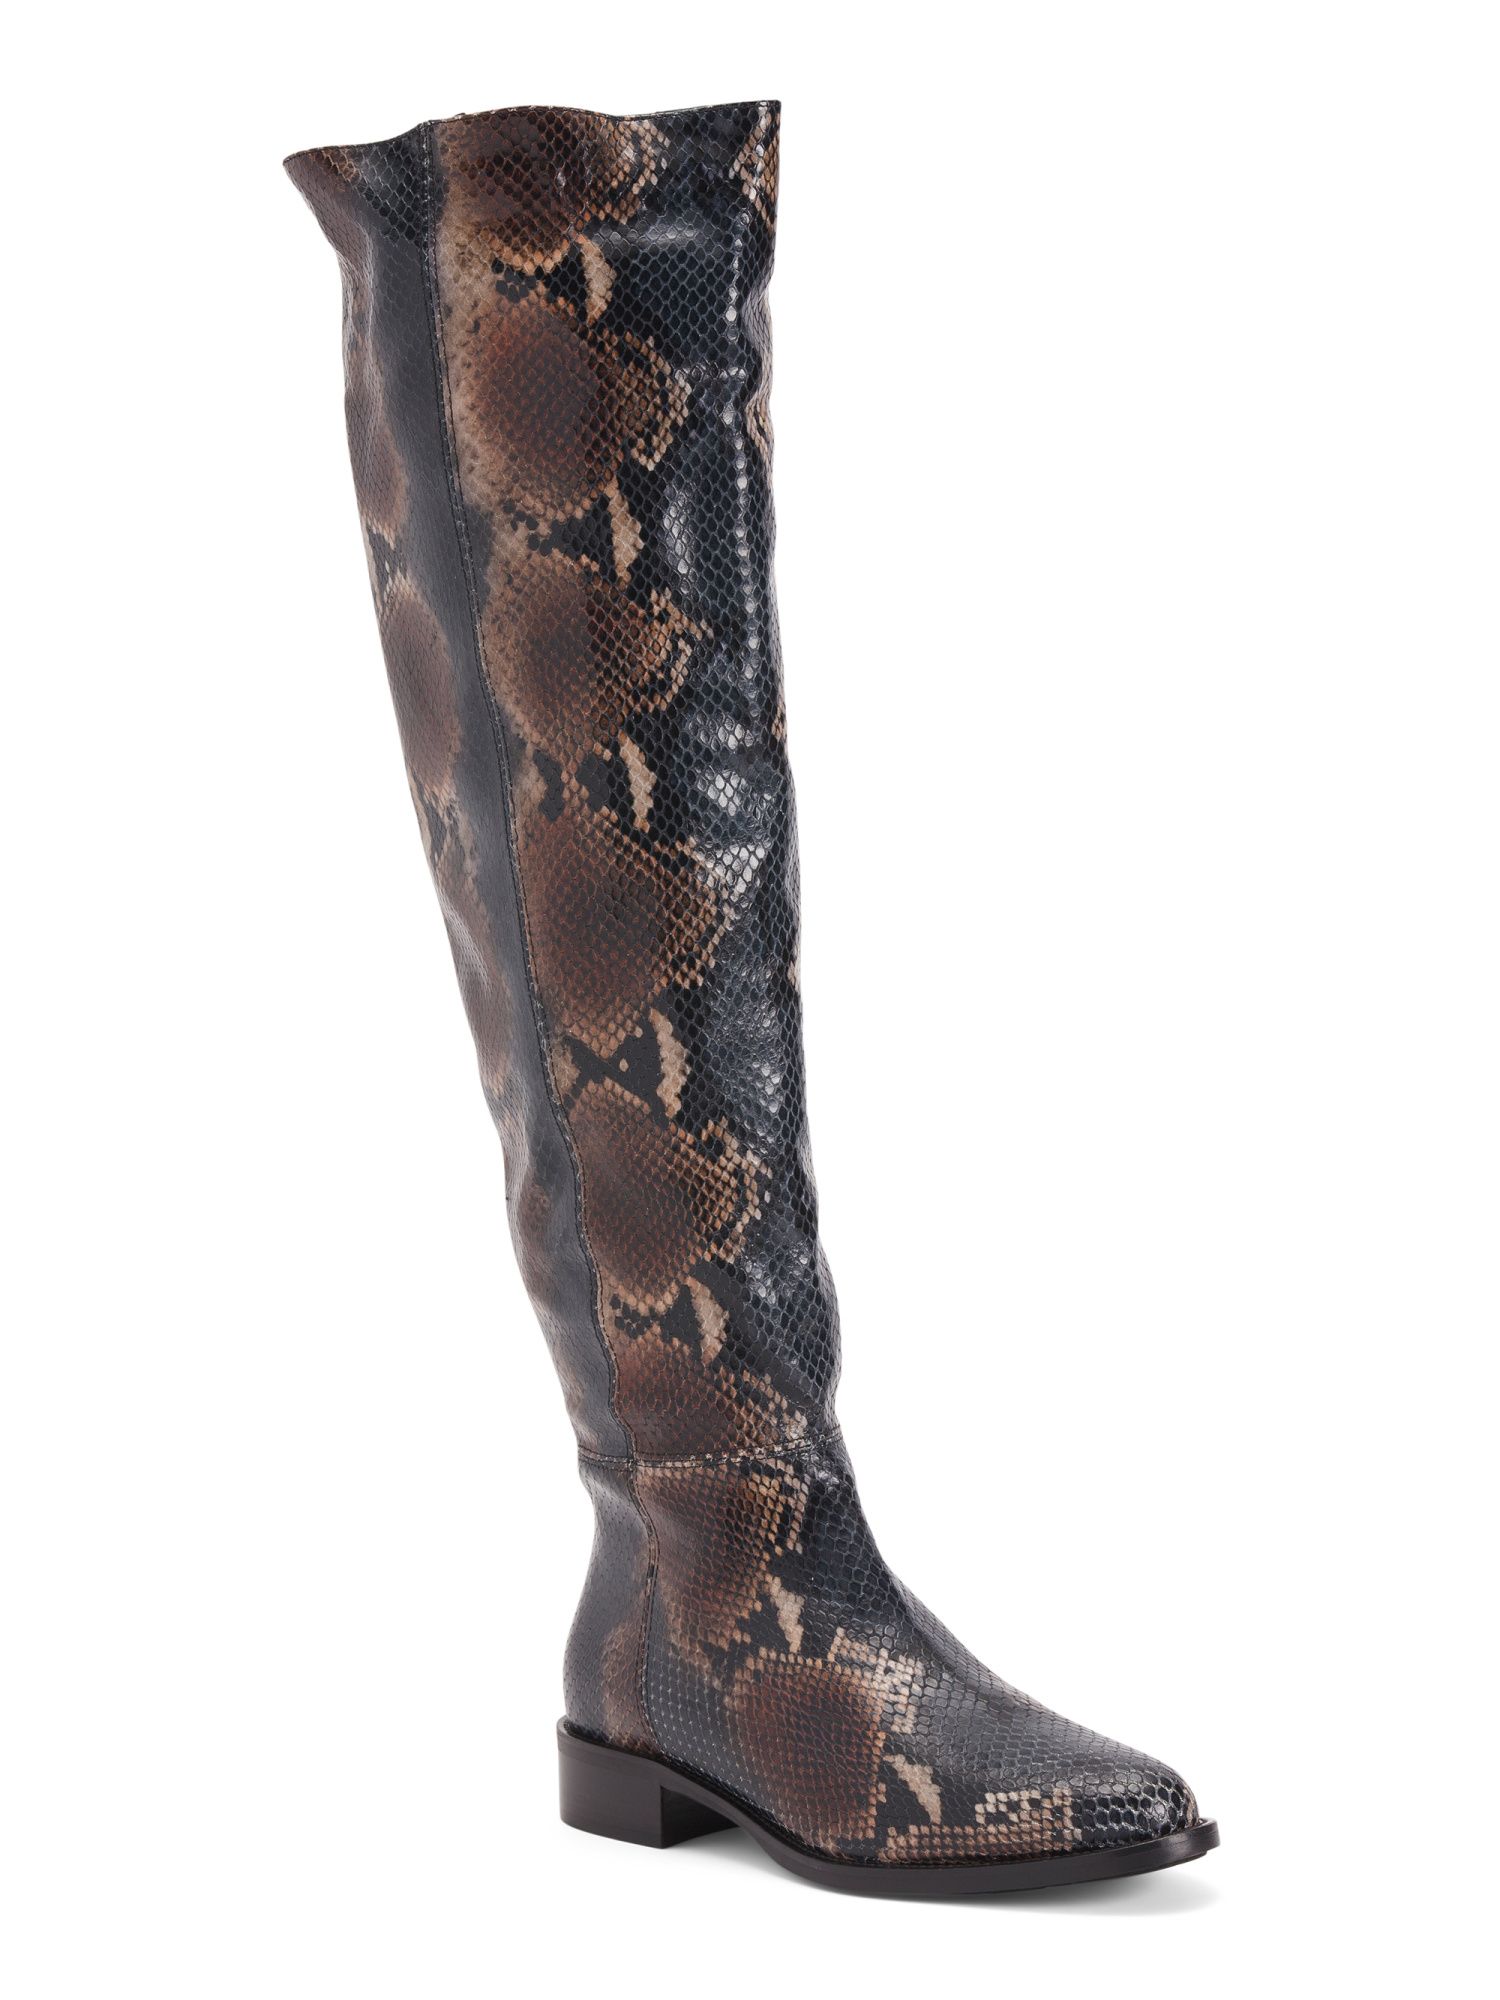 Made In Italy Leather Snake Print High Shaft Boots | TJ Maxx